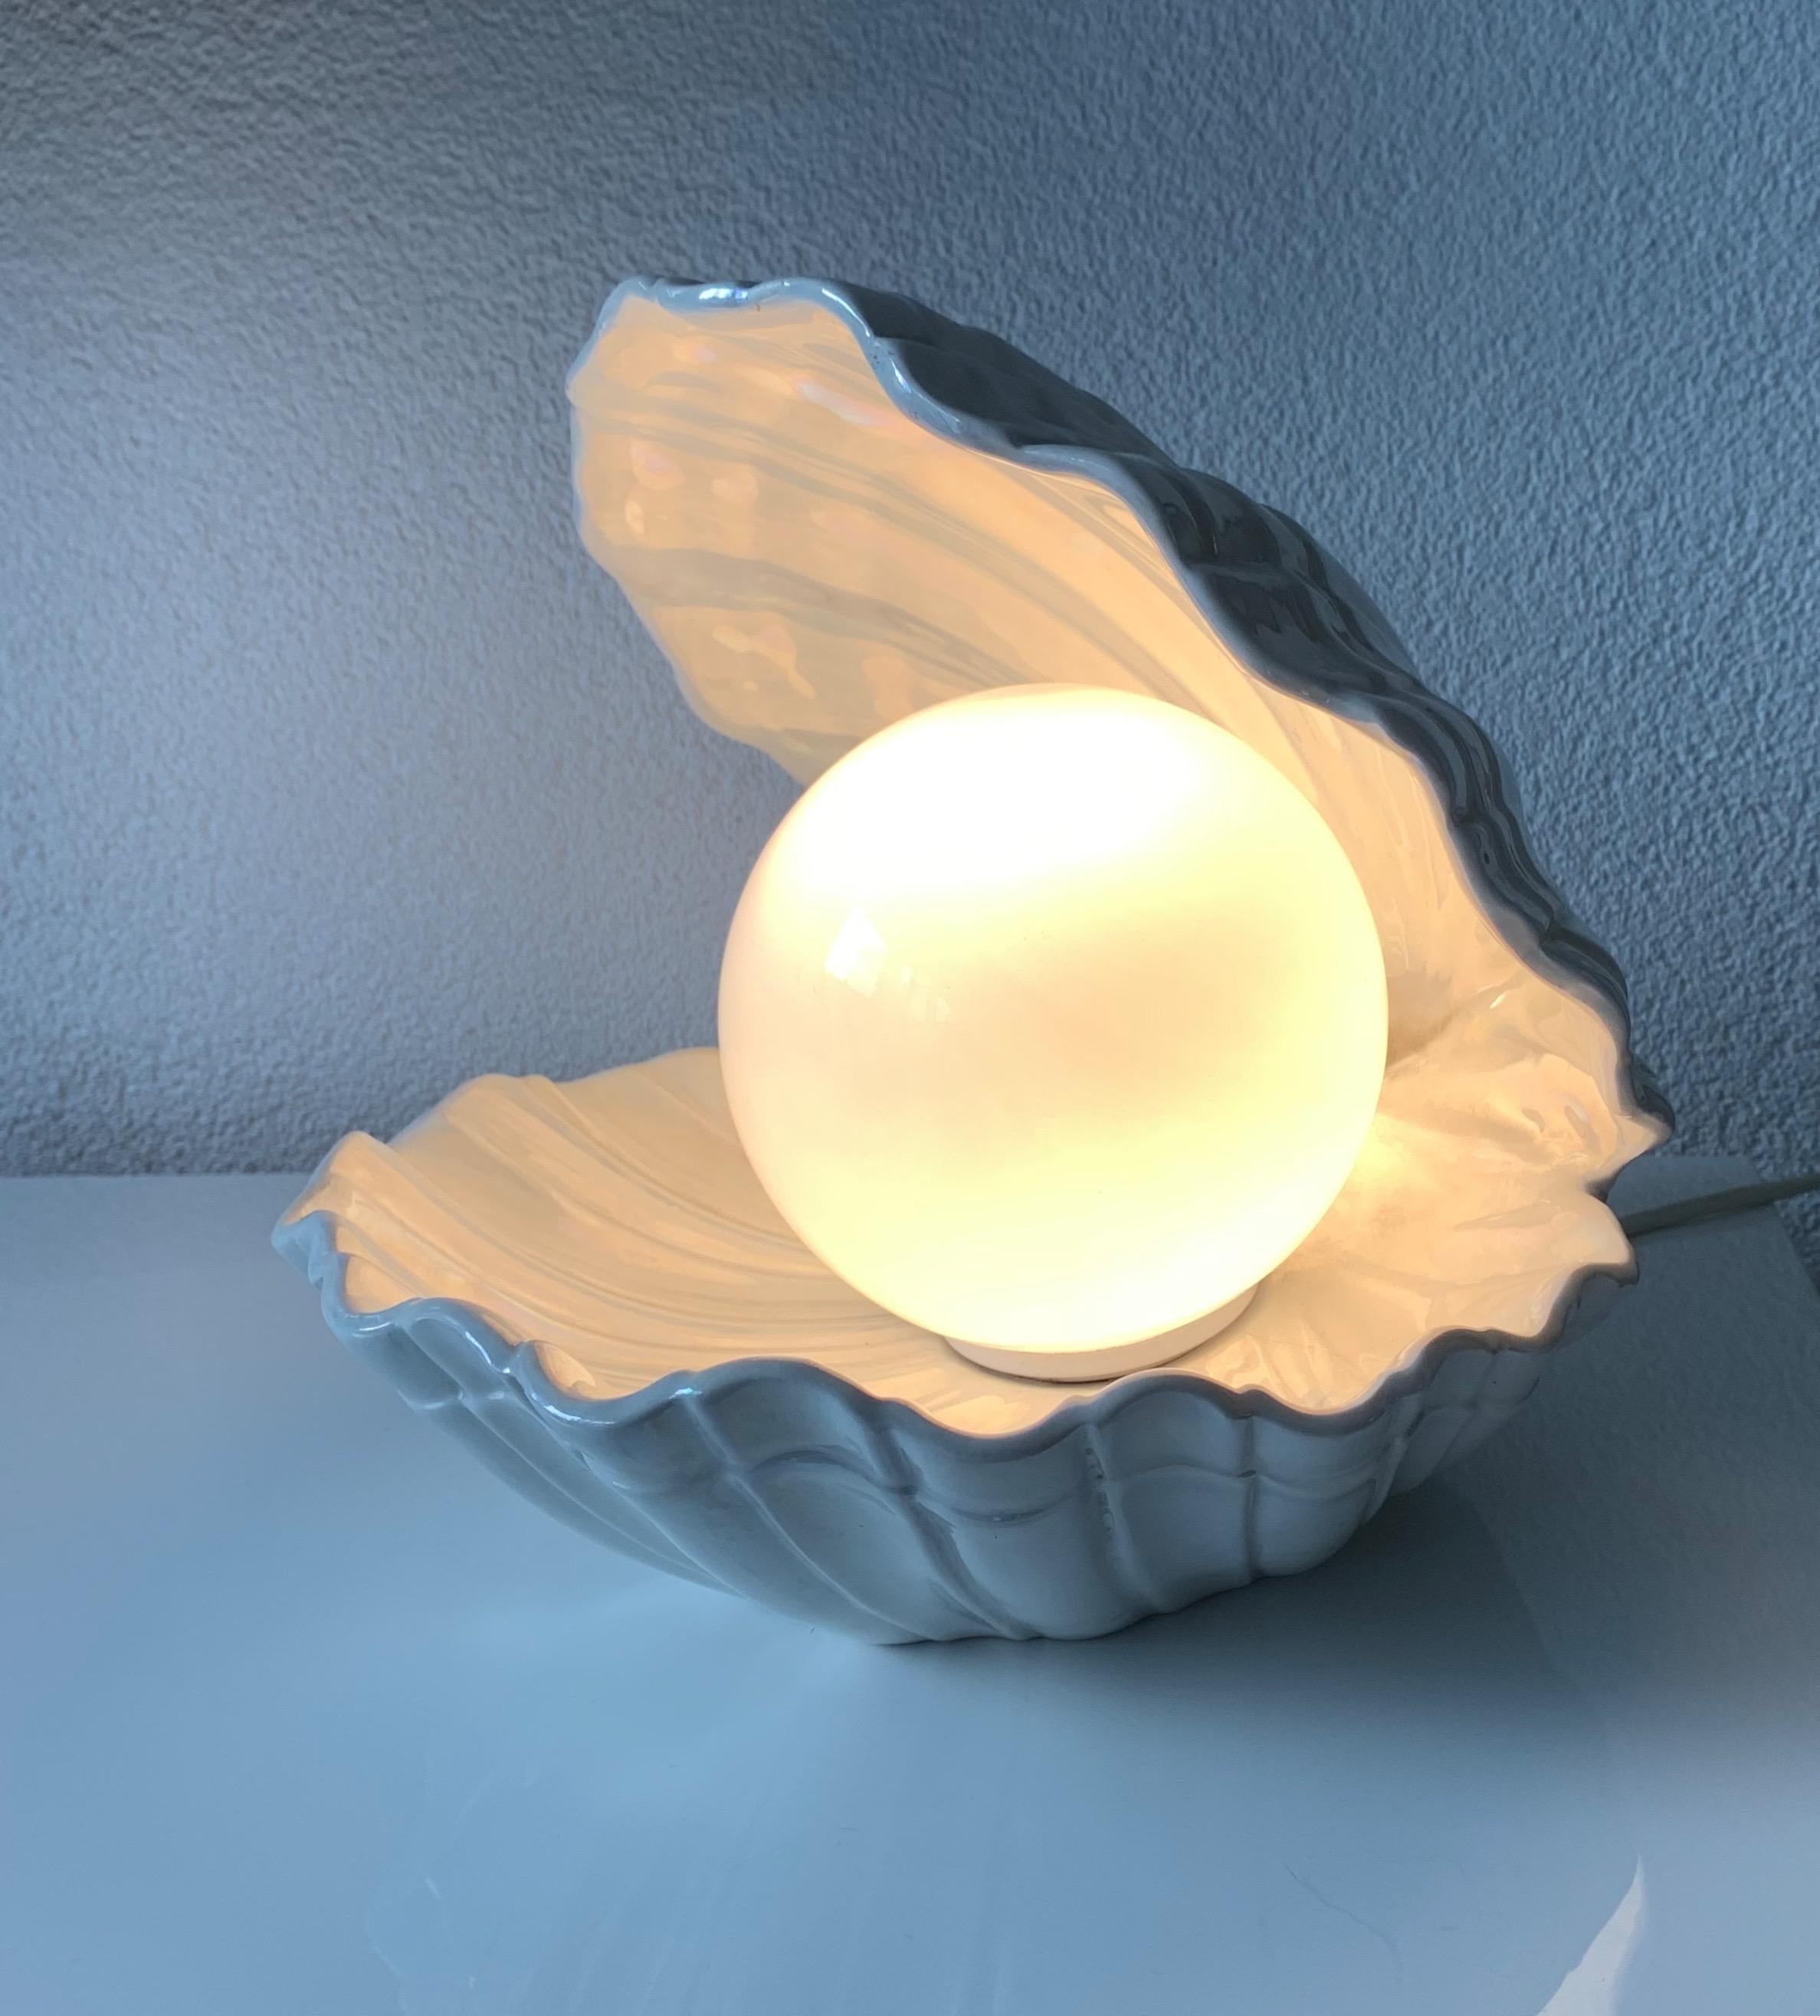 20th Century Rare 1970s Glazed Ceramic Shell or Clam with Glass Pearl Table or Night Lamp